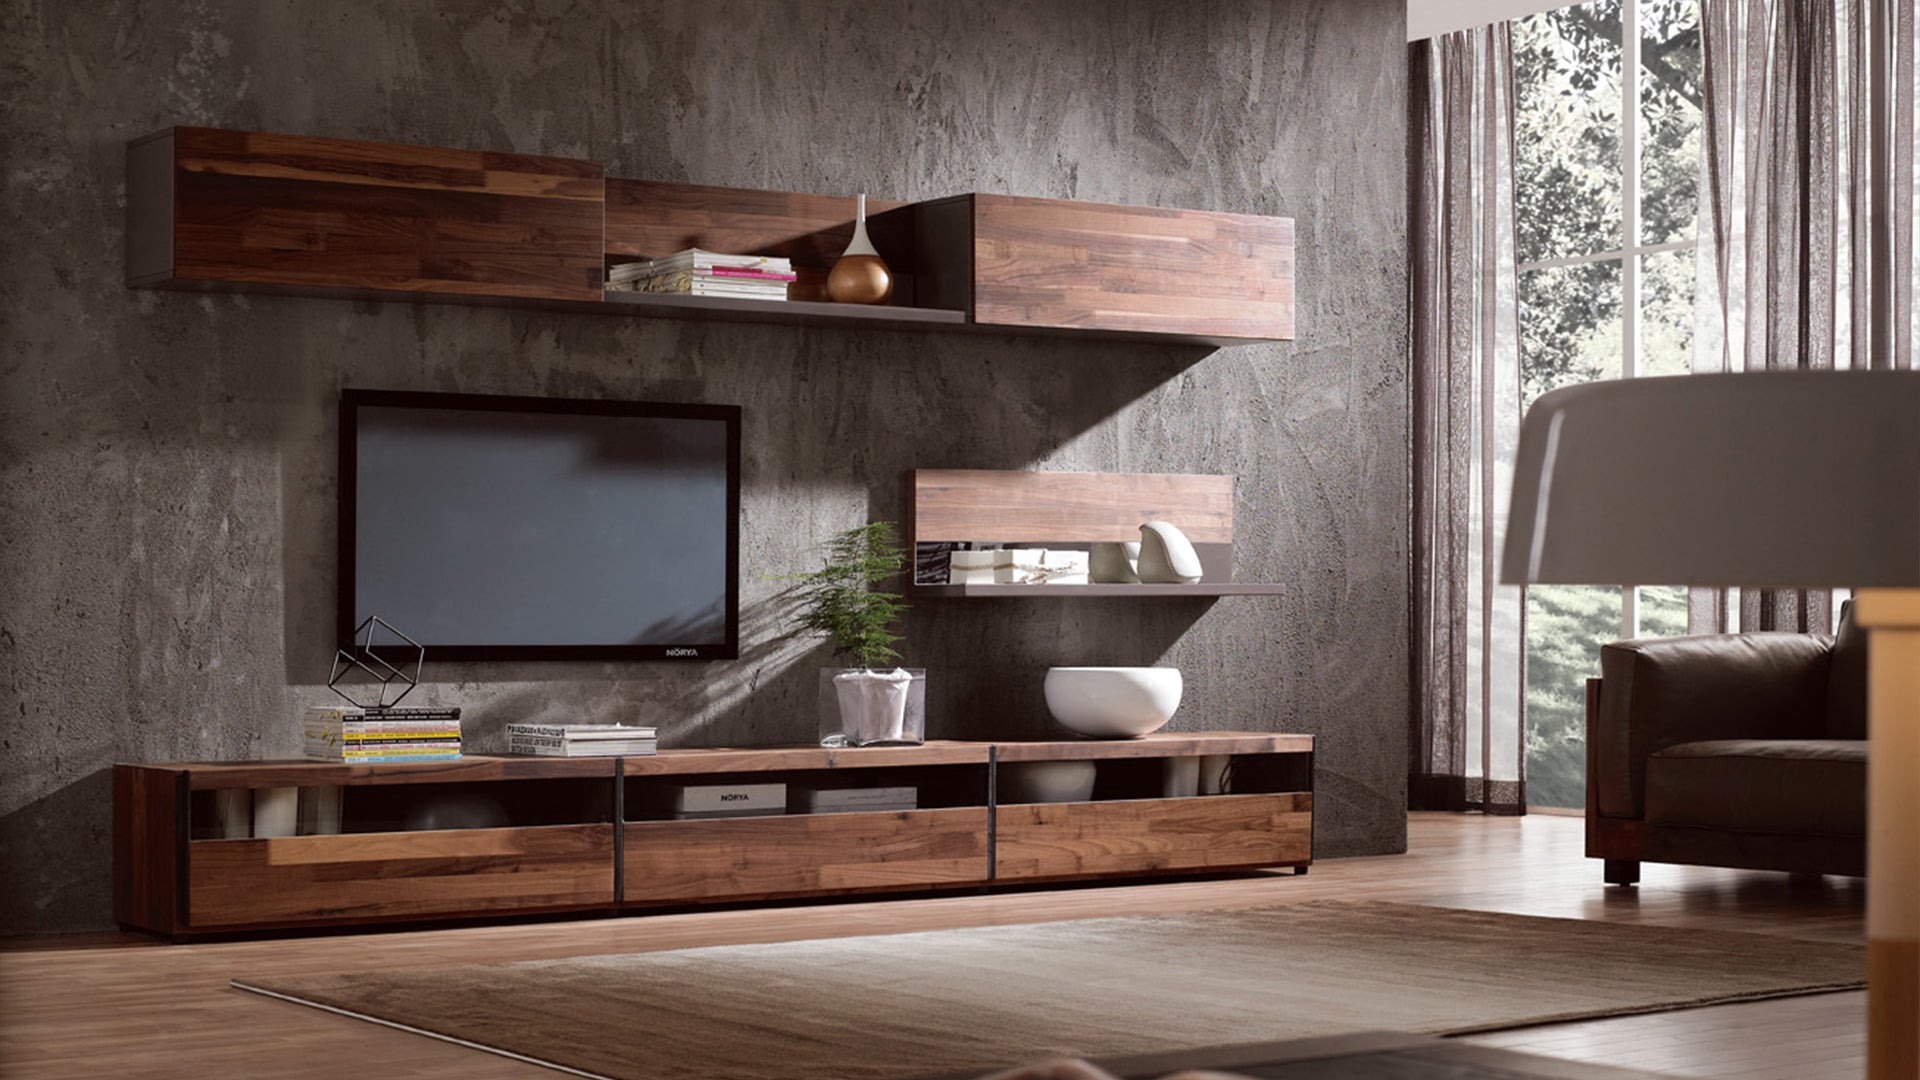 TV Feature Wall vs TV Wall Units with an Array of Storage Cabinets and Shelves